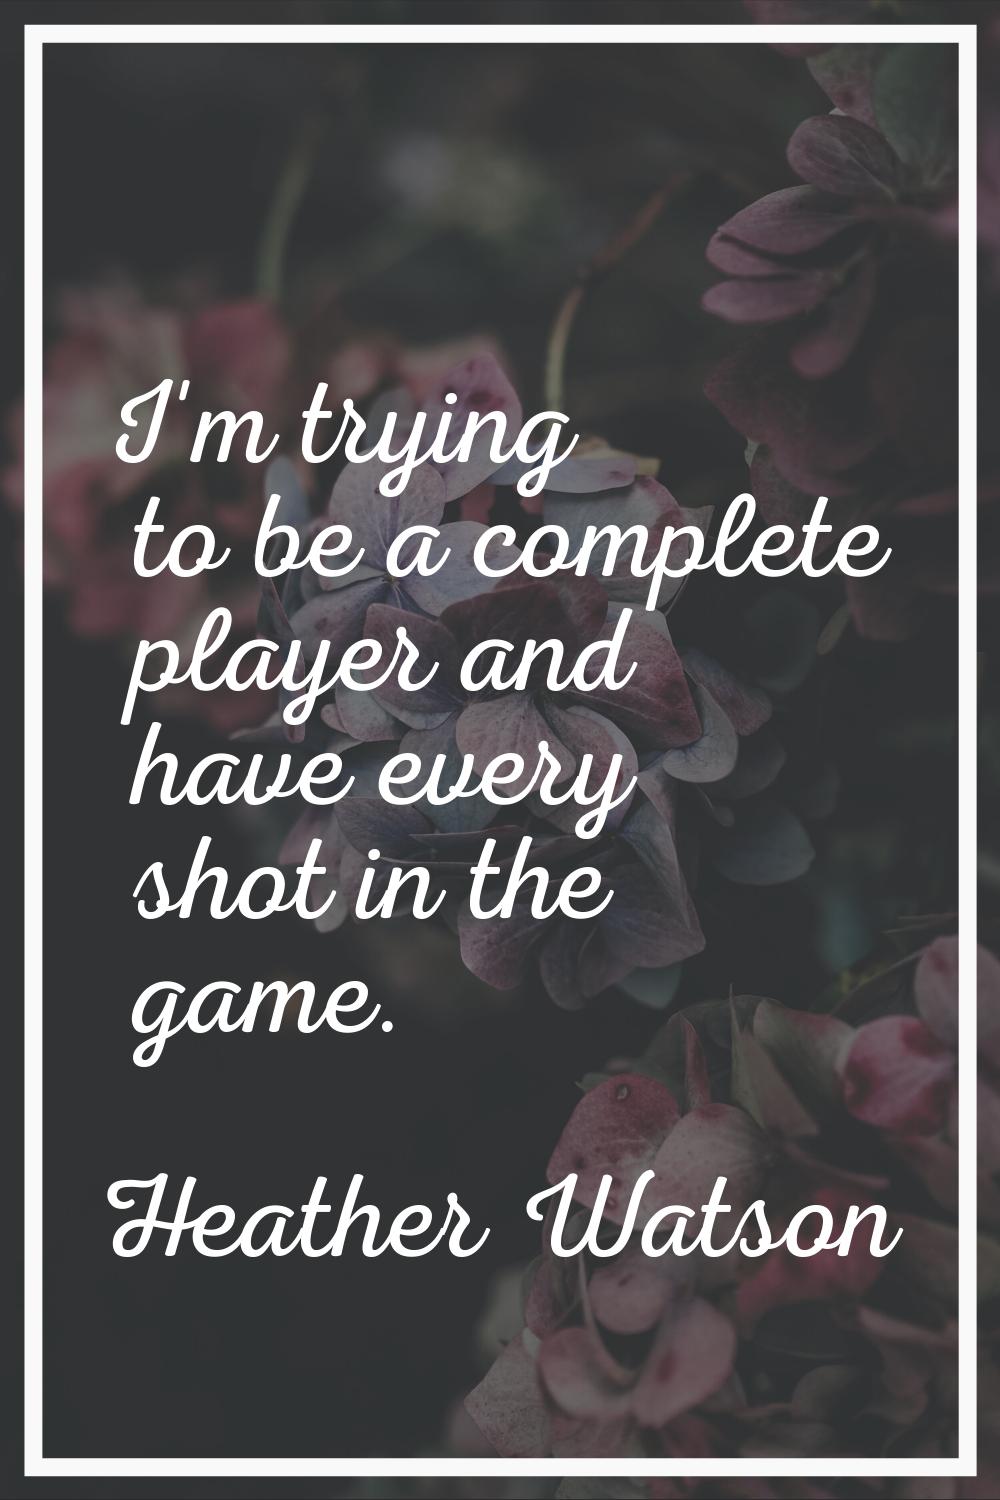 I'm trying to be a complete player and have every shot in the game.